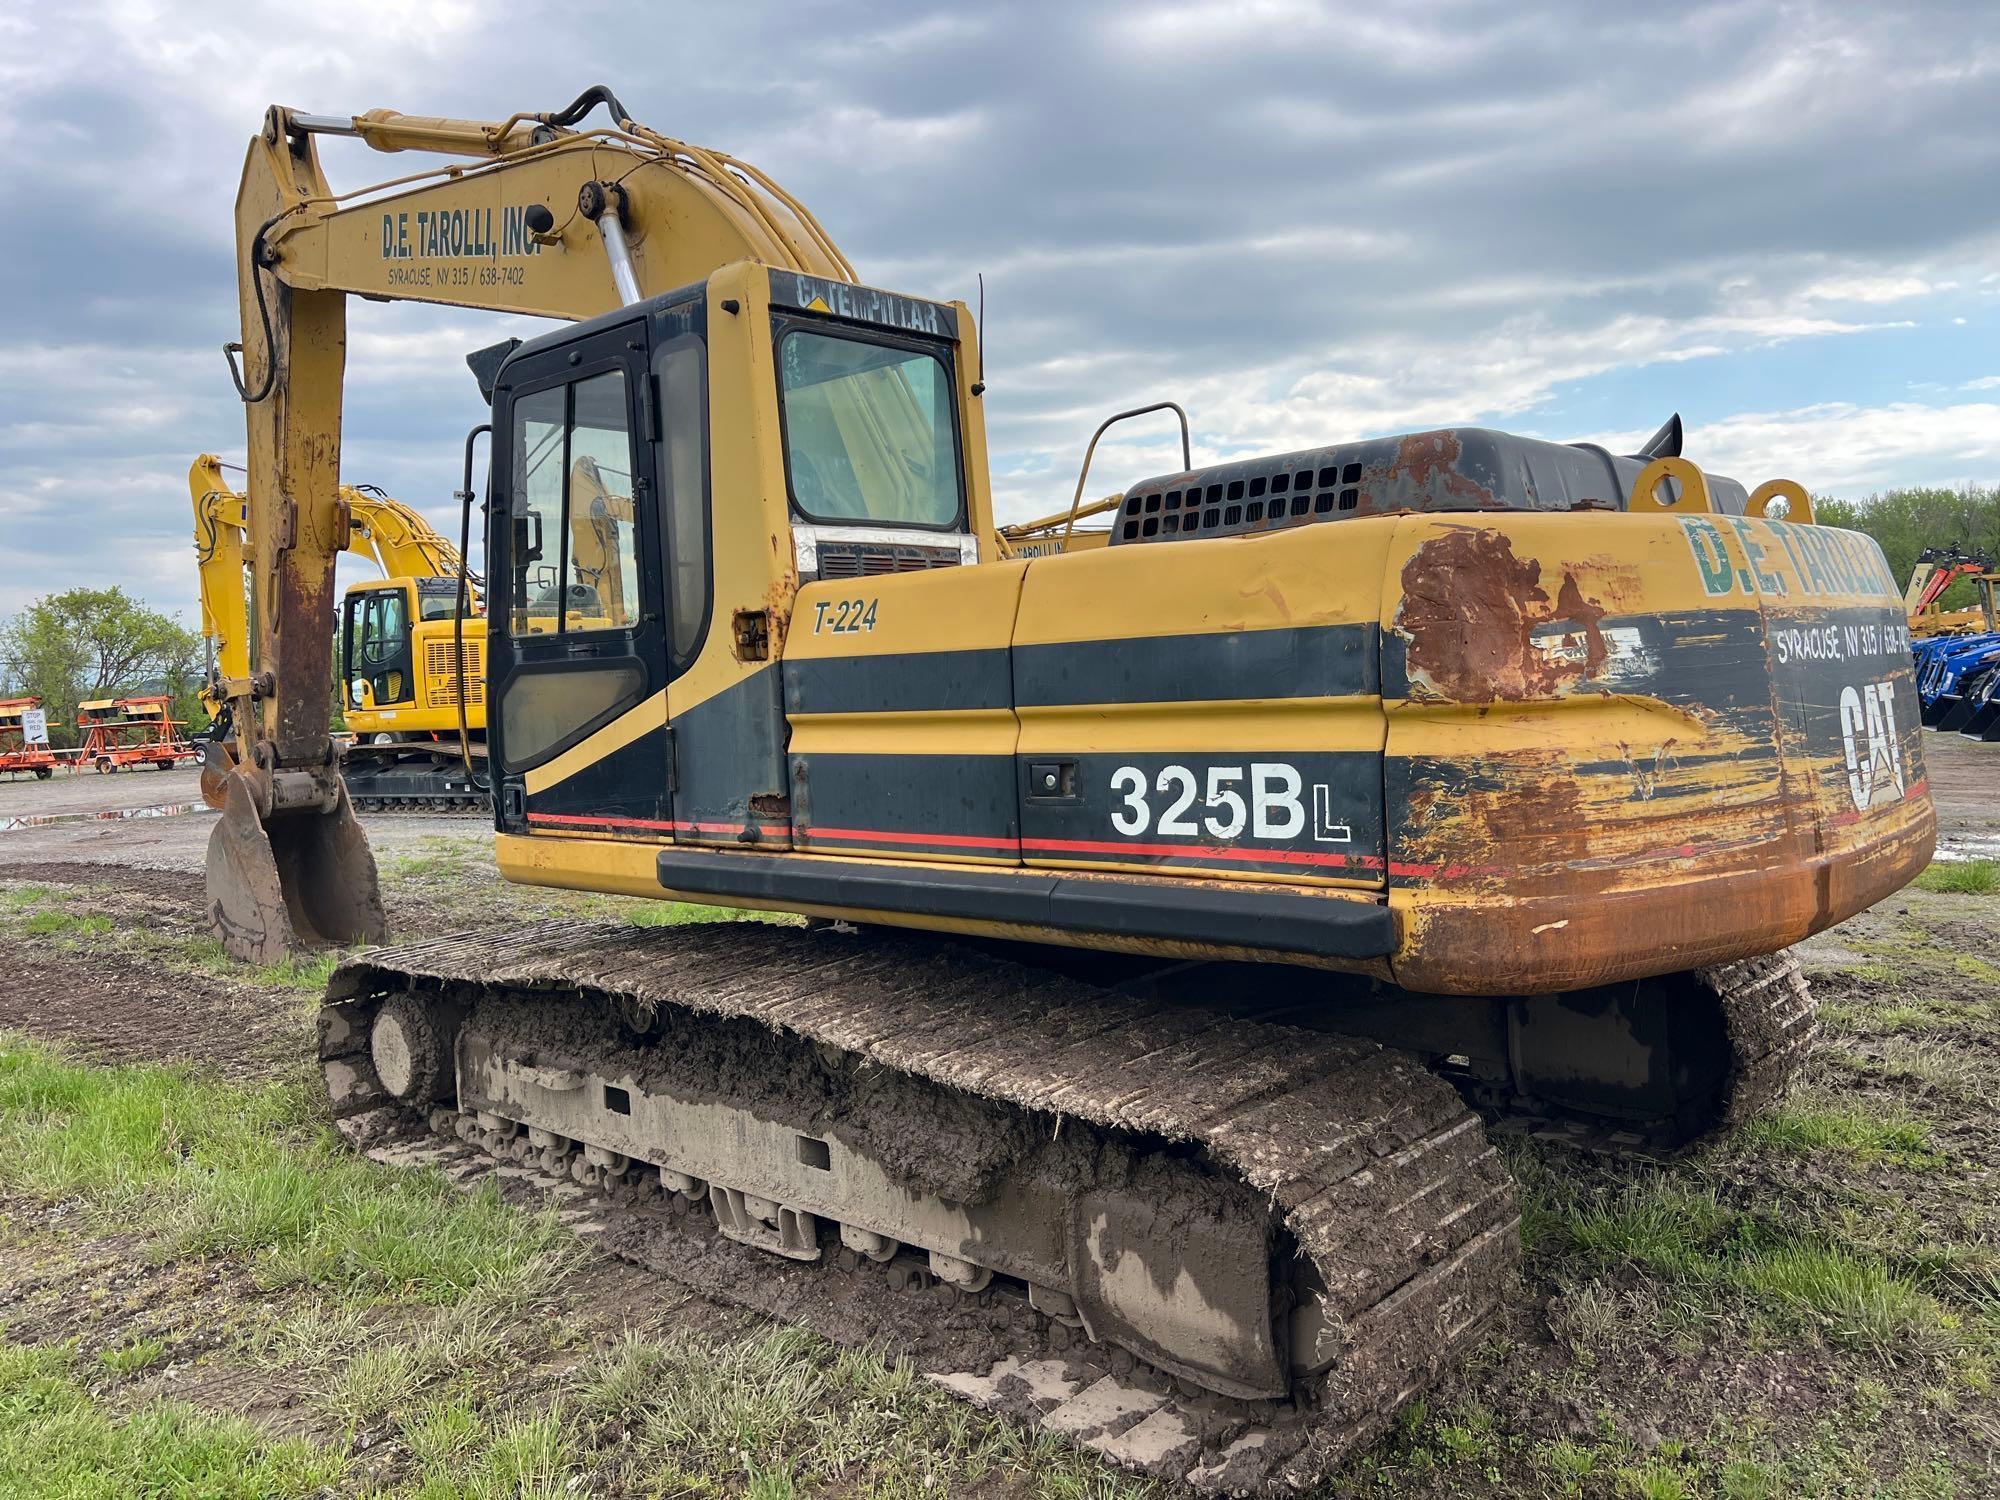 CAT 325BL HYDRAULIC EXCAVATOR SN:2JR00539 powered by Cat 3116TA diesel engine, equipped with Cab,